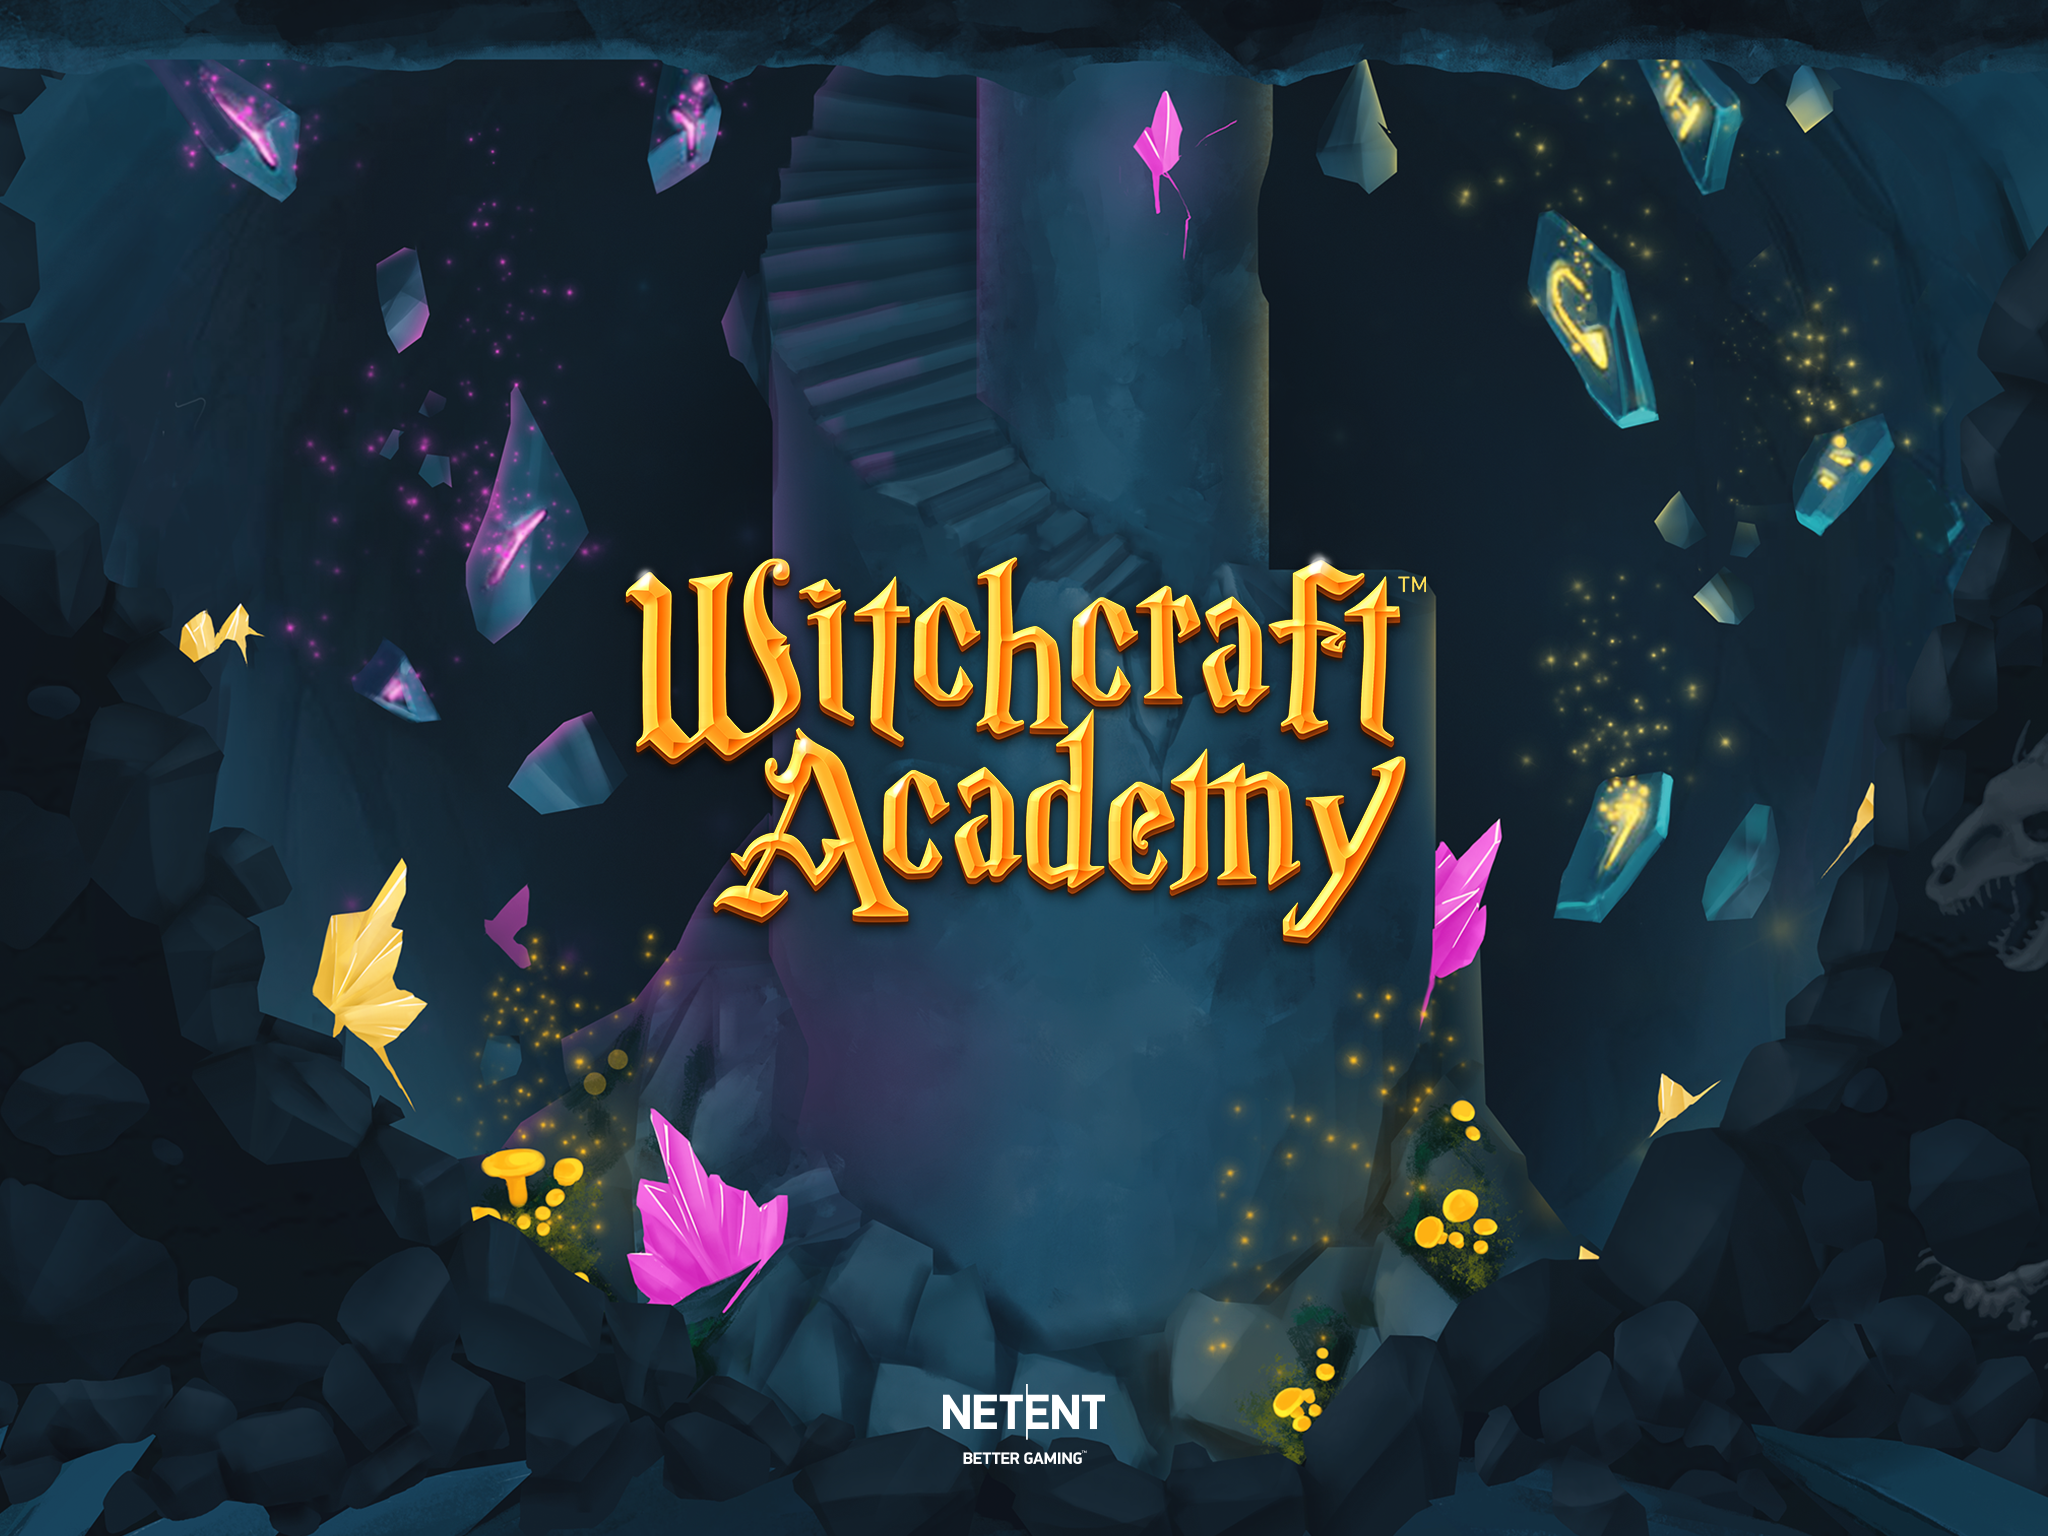 05_tablet_wallpaper_2048x1536_witchcraft.png thumbnail